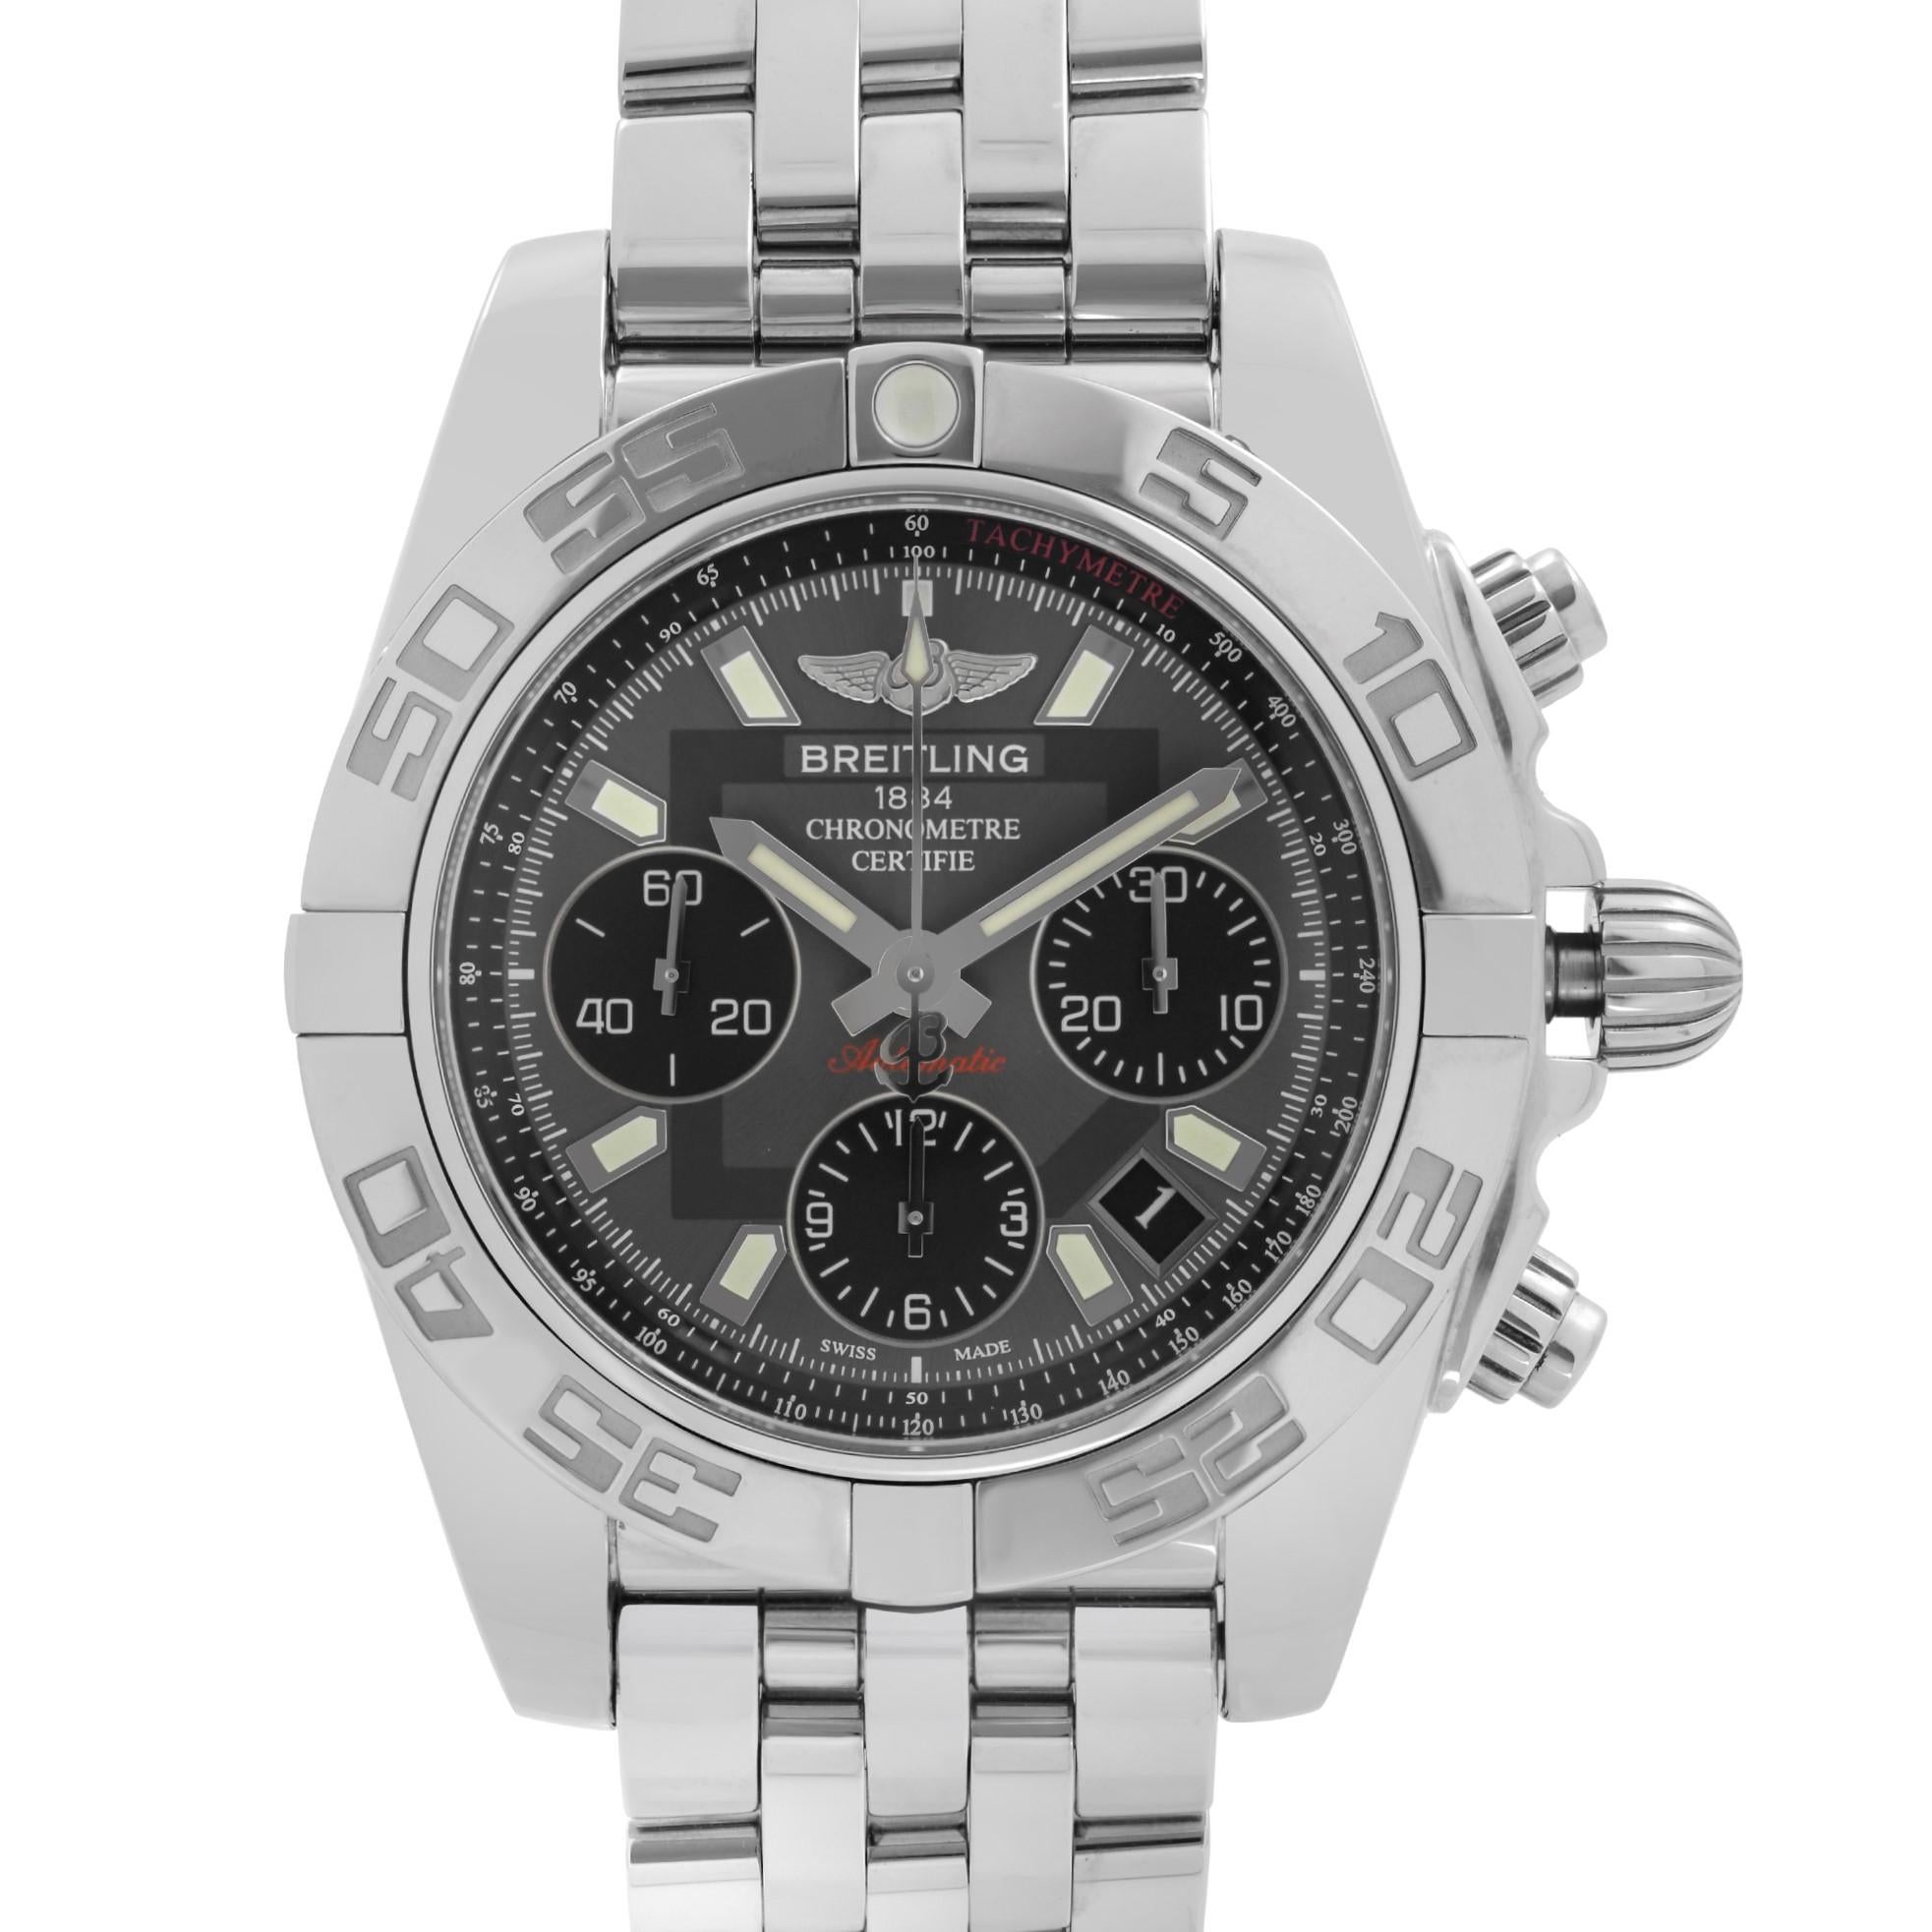 Never Worn Breitling Chronomat 41mm Steel Gray Dial Men's Watch AB014012-F554-378A. This Beautiful Timepiece Features: Stainless Steel Case and Bracelet, Uni-Directional Rotating Stainless Steel Bezel, Gray Dial with Luminous Silver-Tone Hands, And